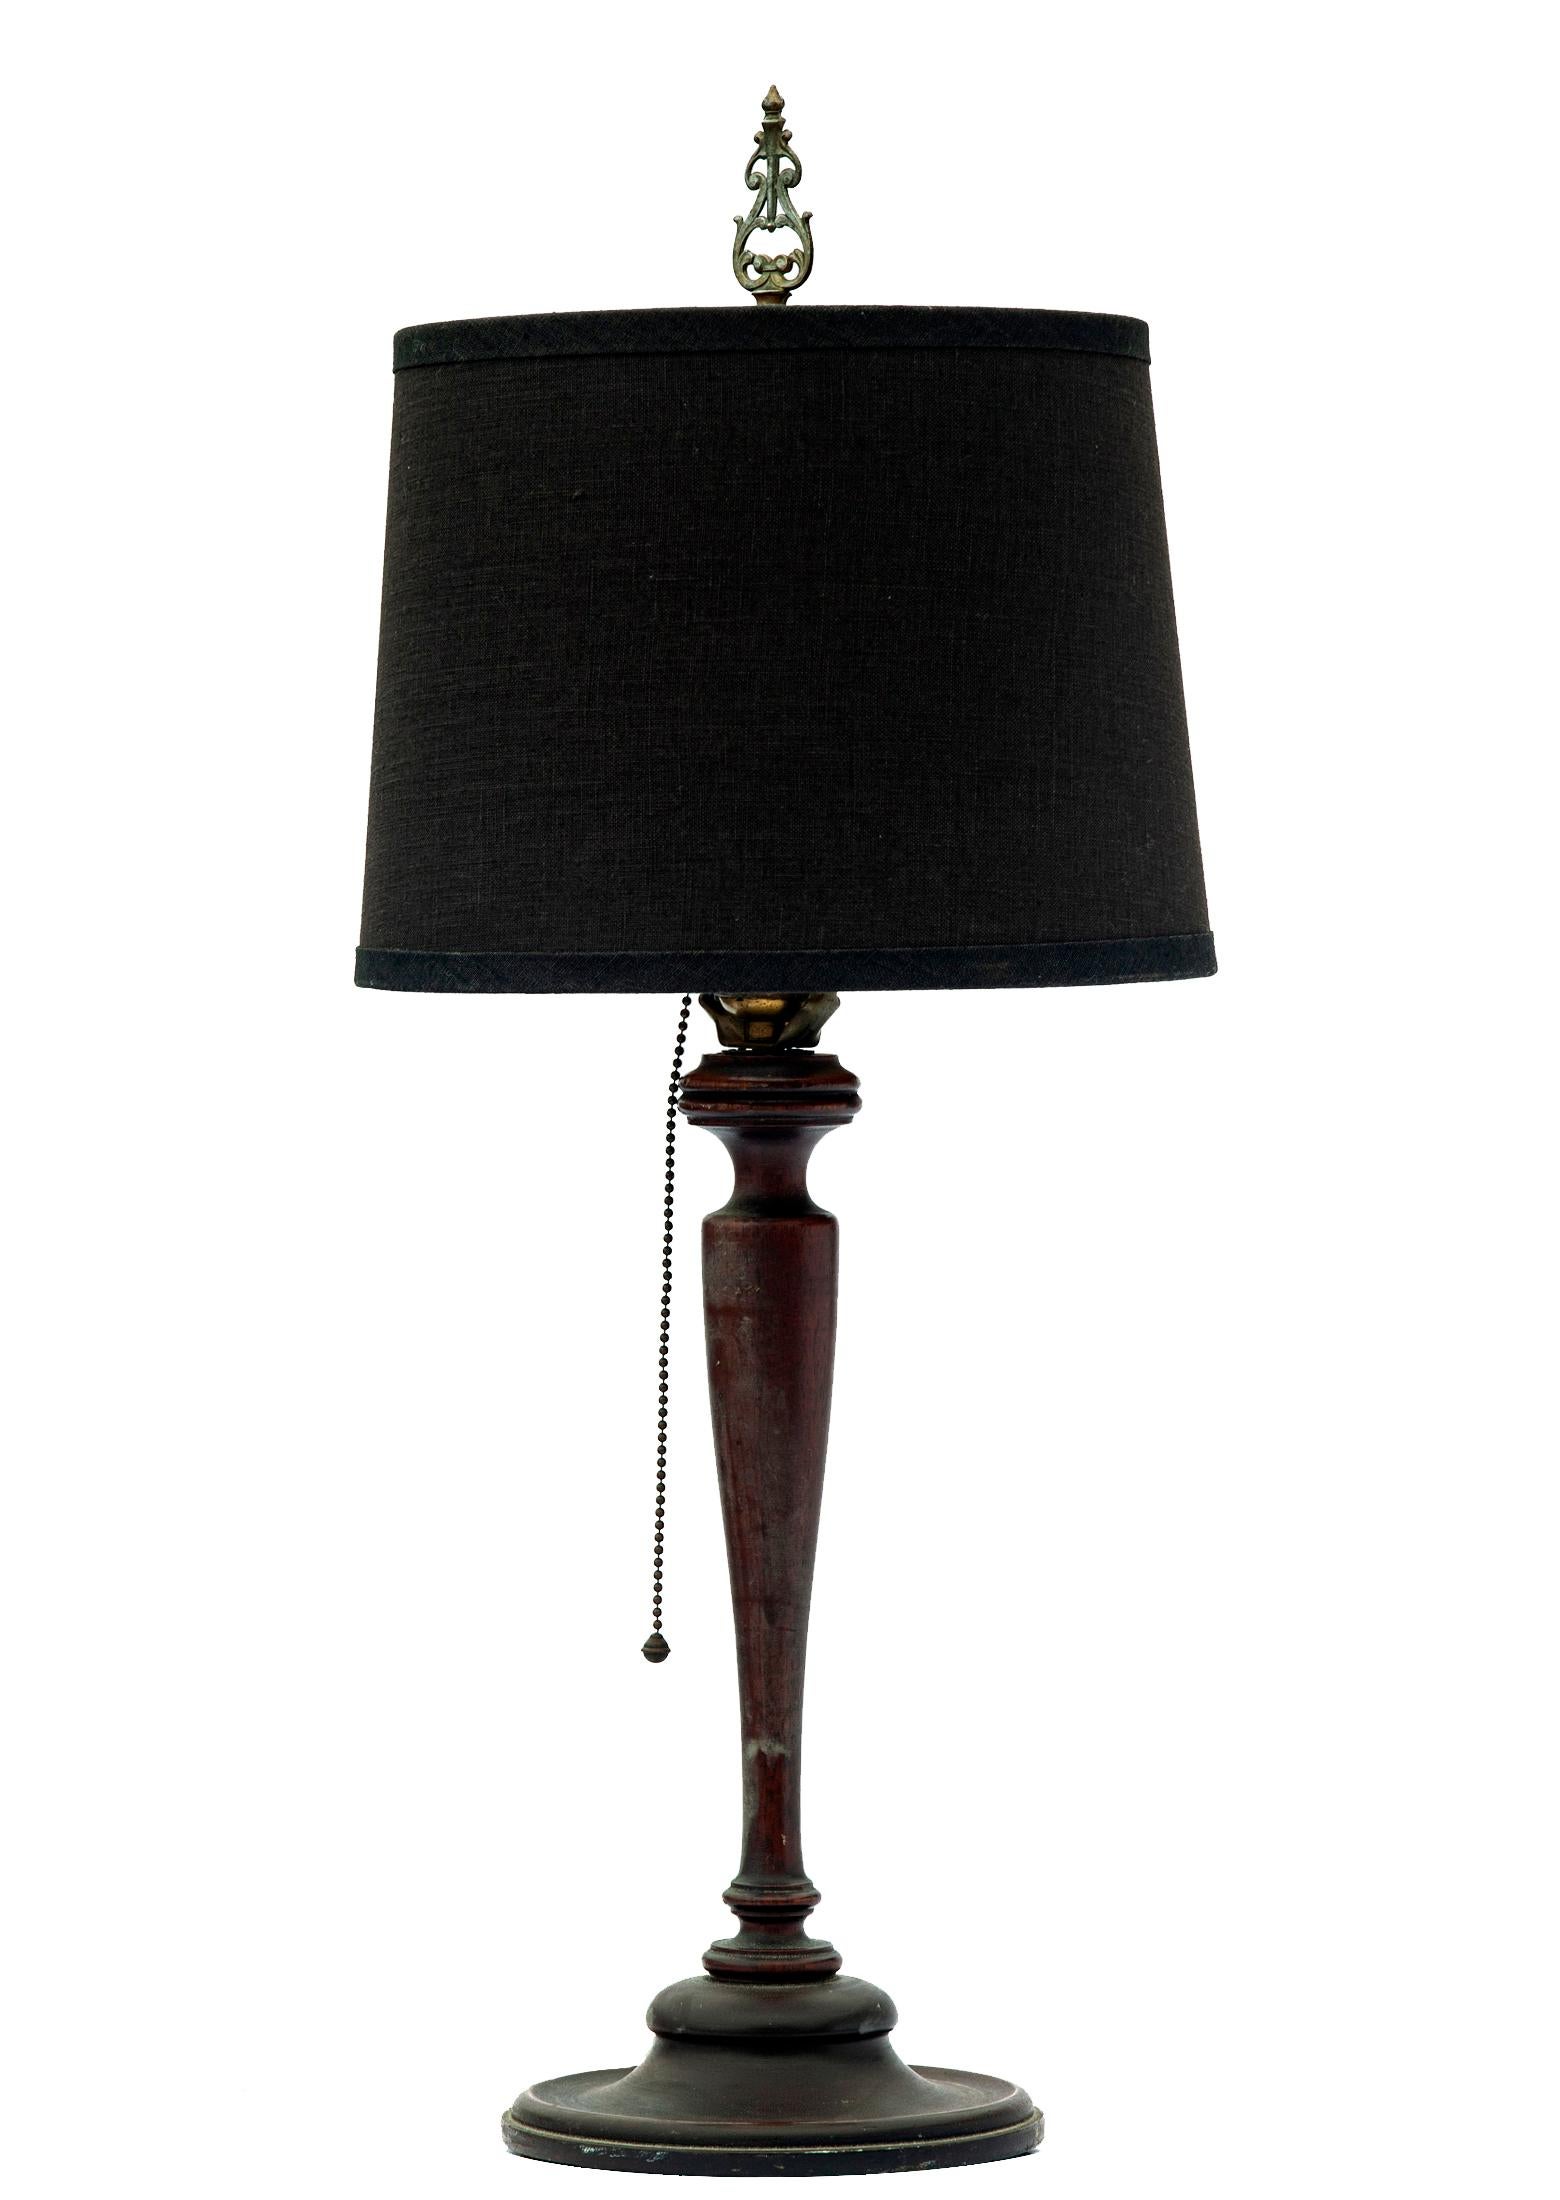 Antique Mahogany hand turned wood spool lamp. 
This table lamp in finely turned with original finish. The original extra-long brass pull chain ins in working order.
A new fine silk shade by RH is included.
Produced by an unknown studio